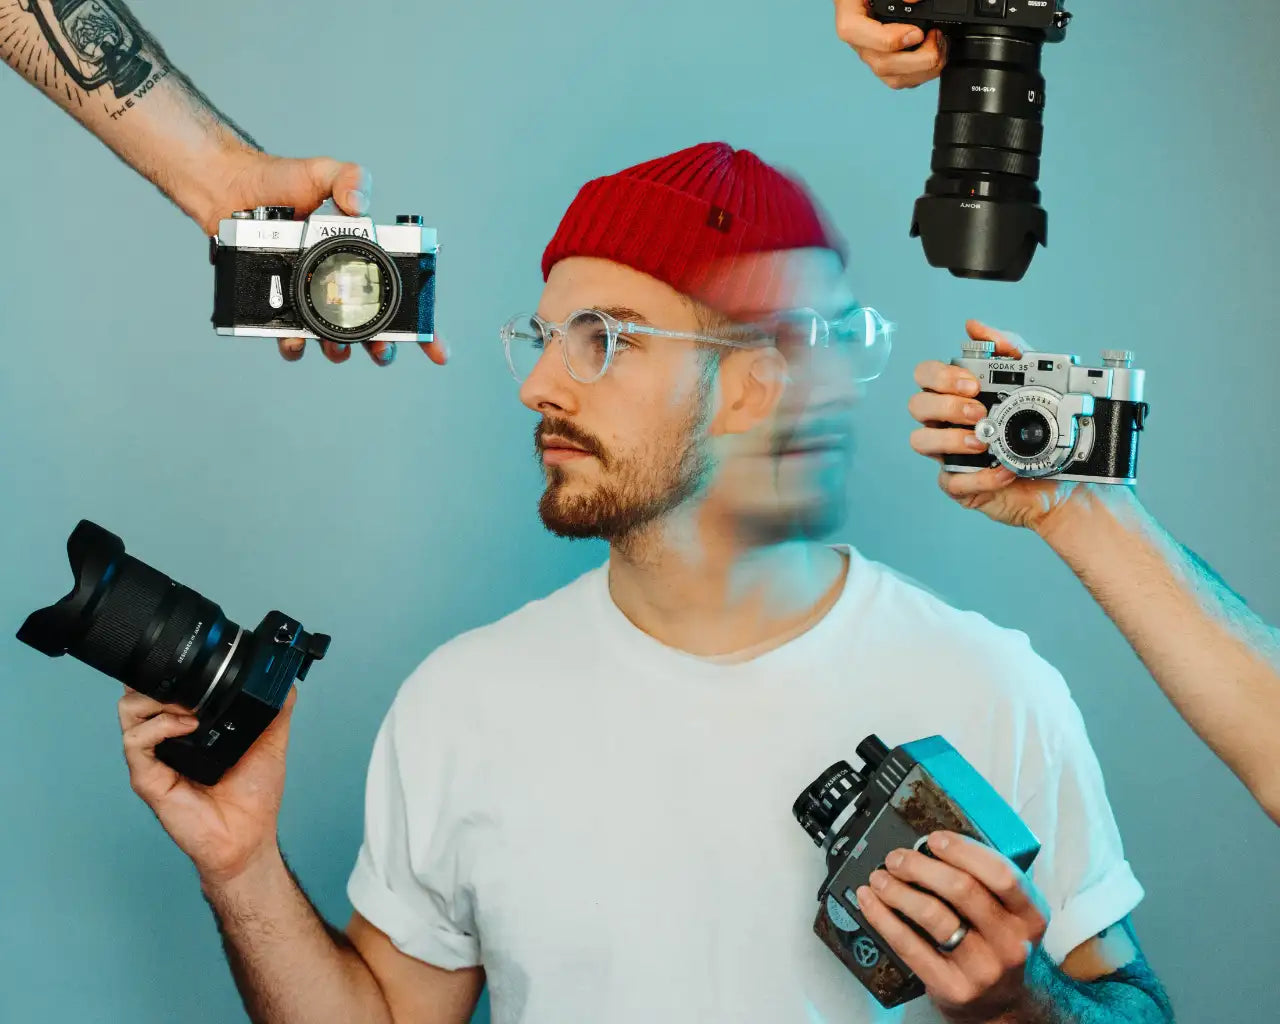 Man wearing clear plastic glasses looking at multiple cameras